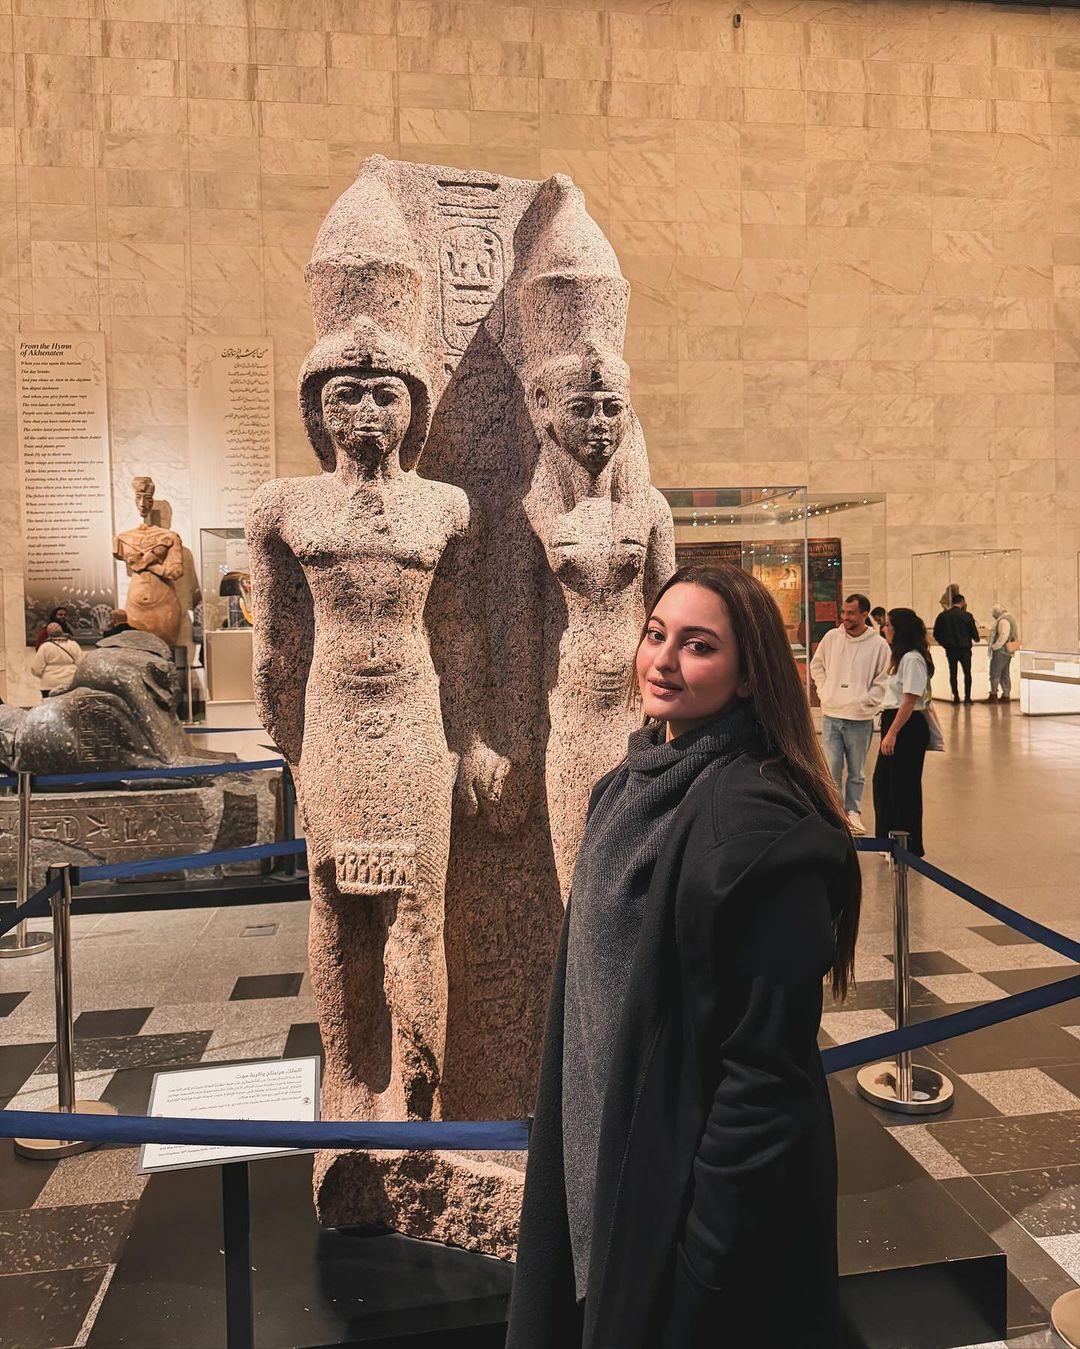 Sonakshi soaked in some history and culture at the National Museum of Egyptian Civilization (NMEC) in Cairo